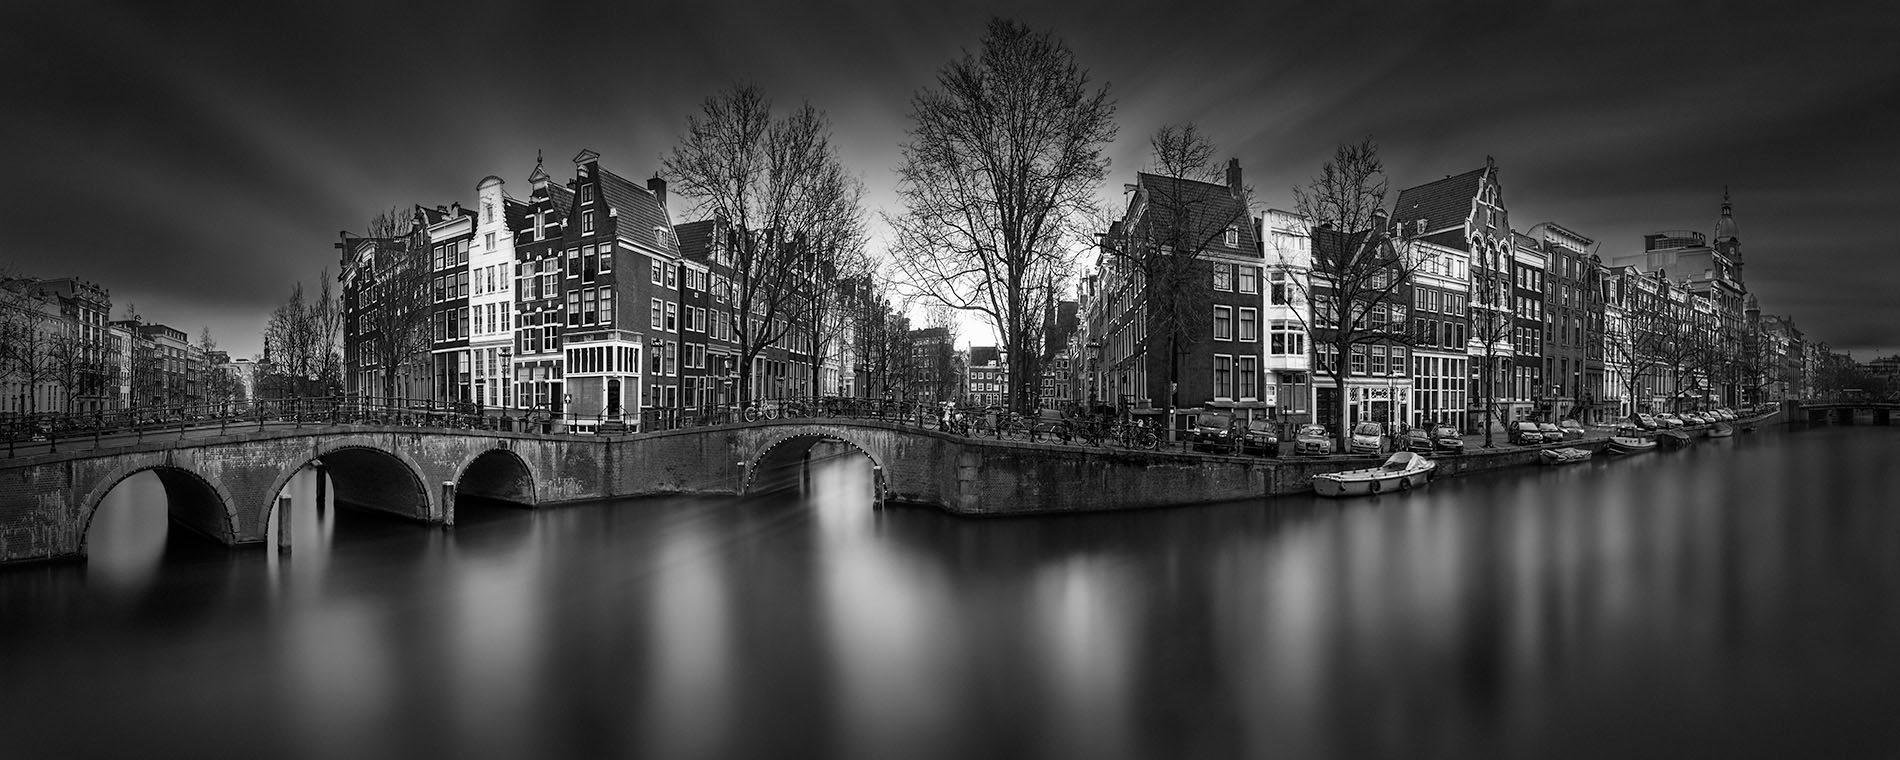 A Tale of the Past I - Keizersgracht Canal Amsterdam - © Julia Anna Gospodarou 2017 - long exposure photography in an urban environment